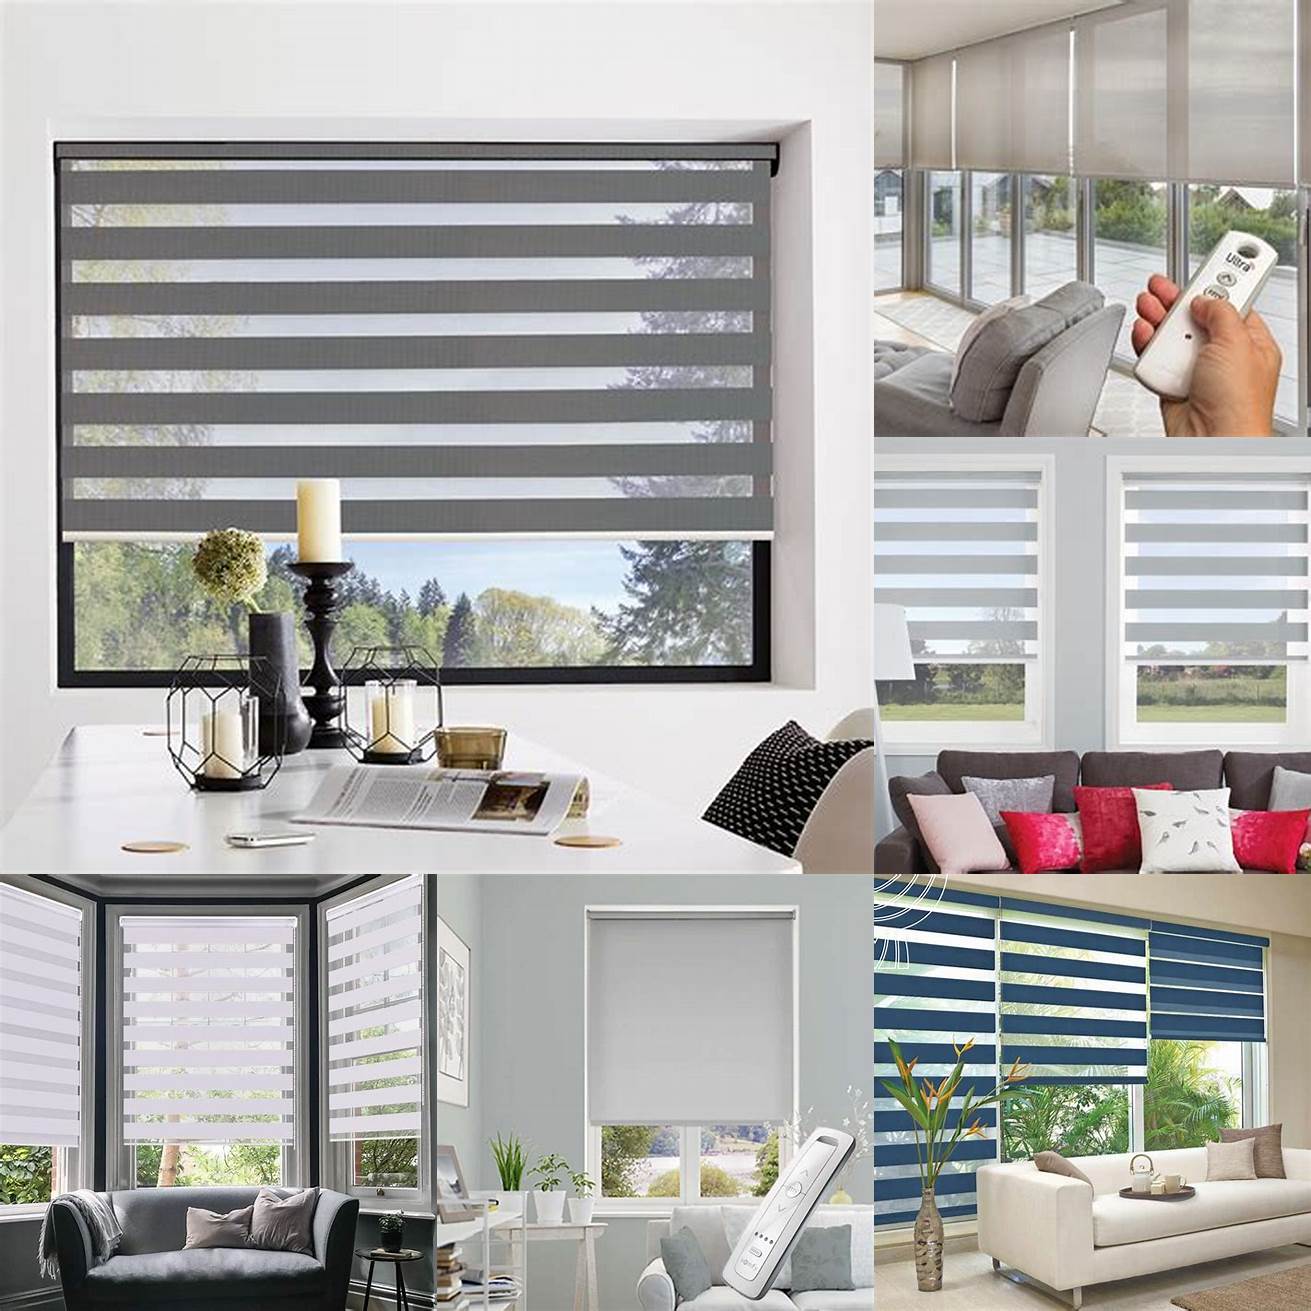 Light Control You can easily adjust roller blinds to control the amount of light that enters your room This makes them ideal for bedrooms and living rooms where you may want to reduce glare or create a cozy atmosphere